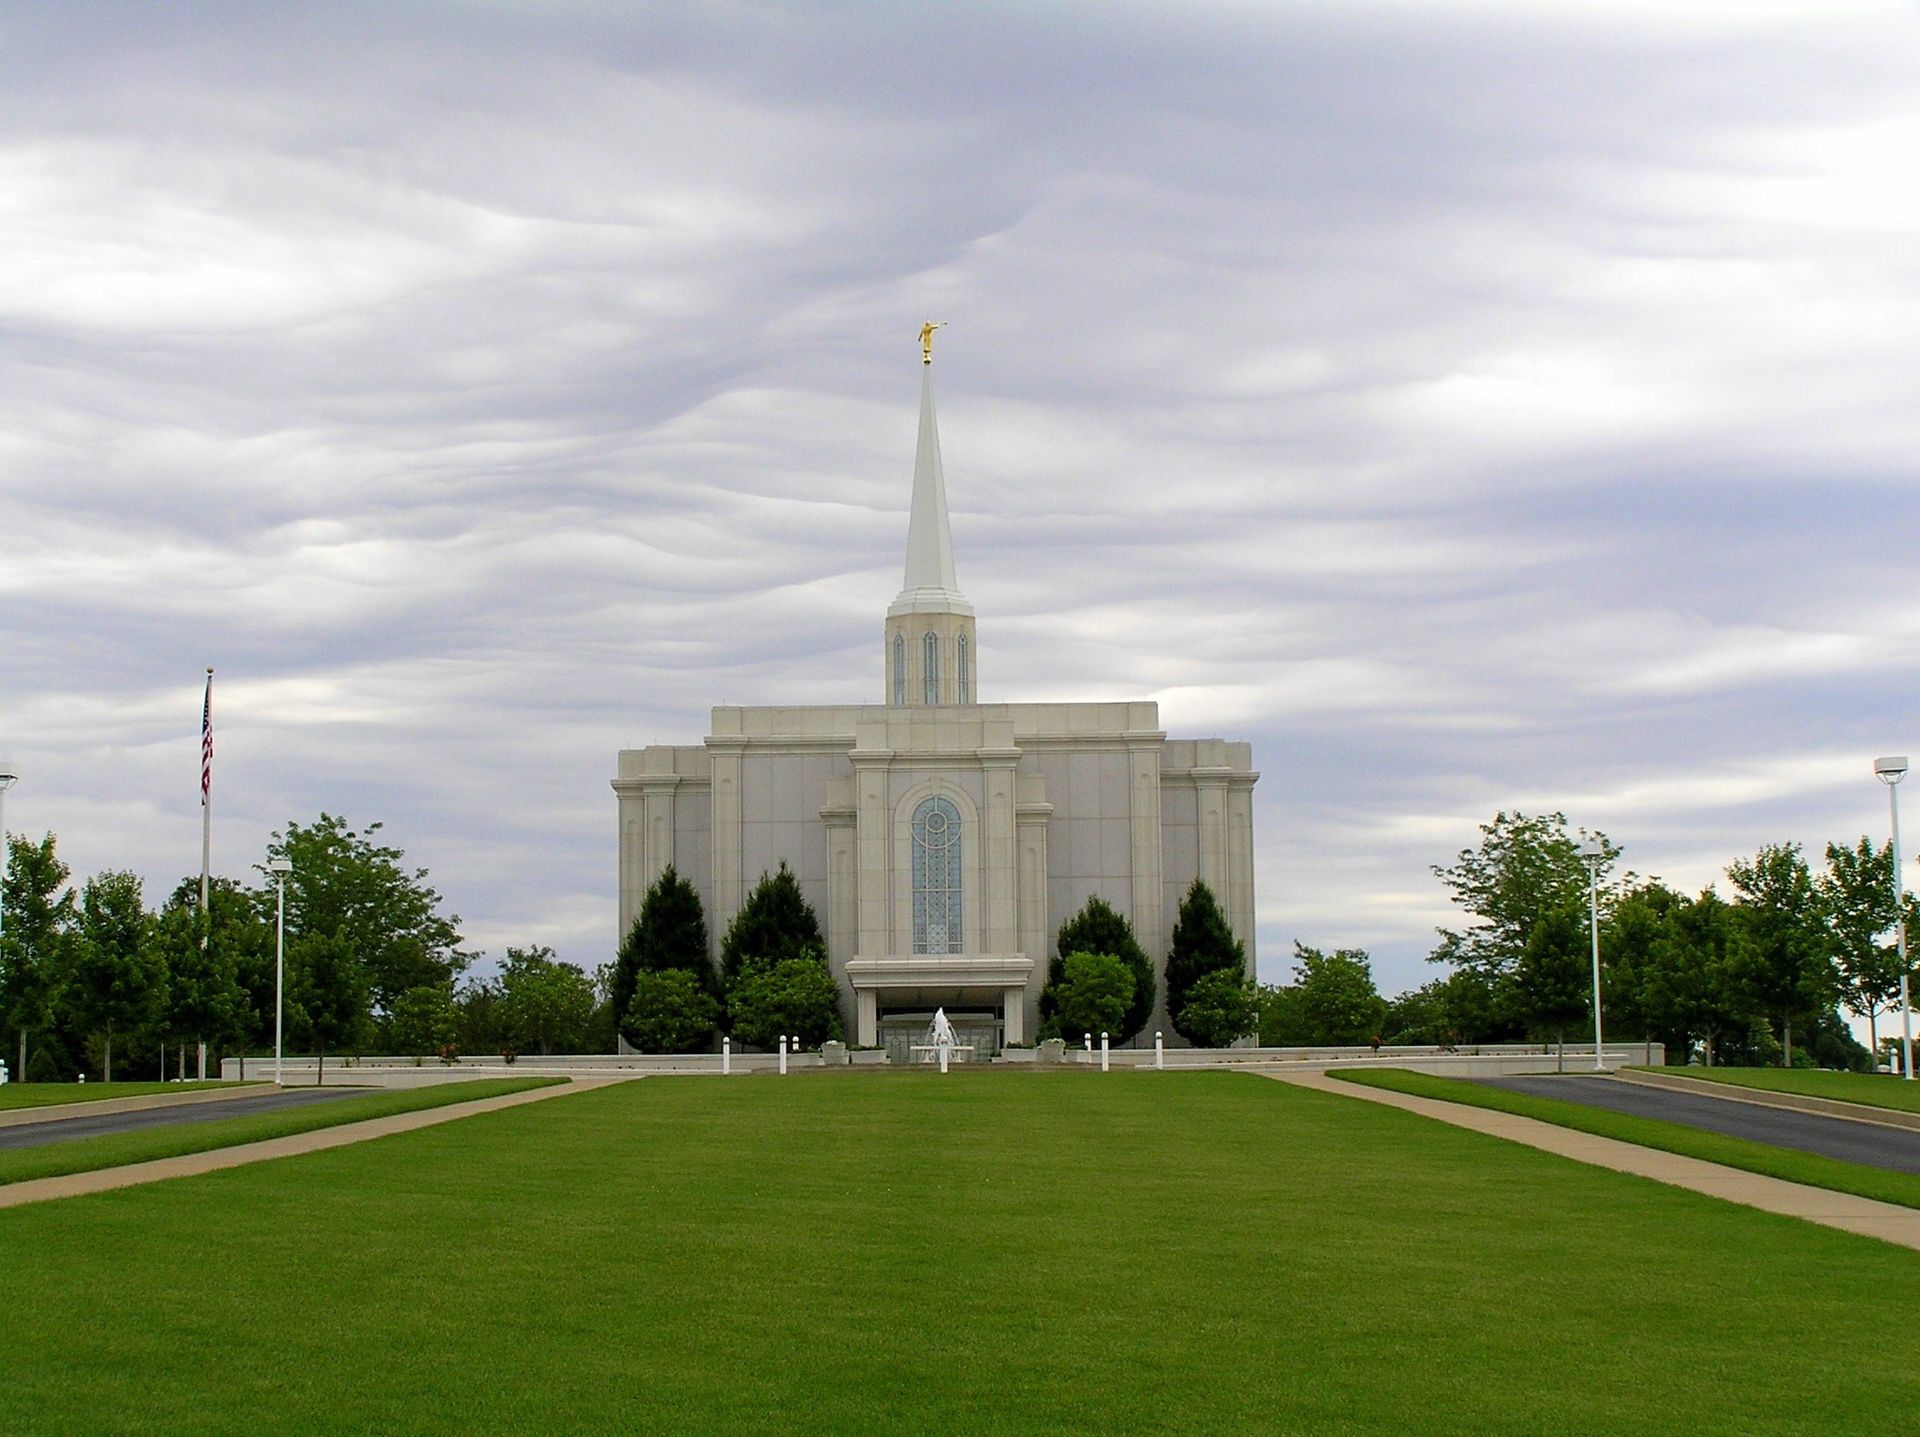 The St. Louis Missouri Temple and lawn on a cloudy day.